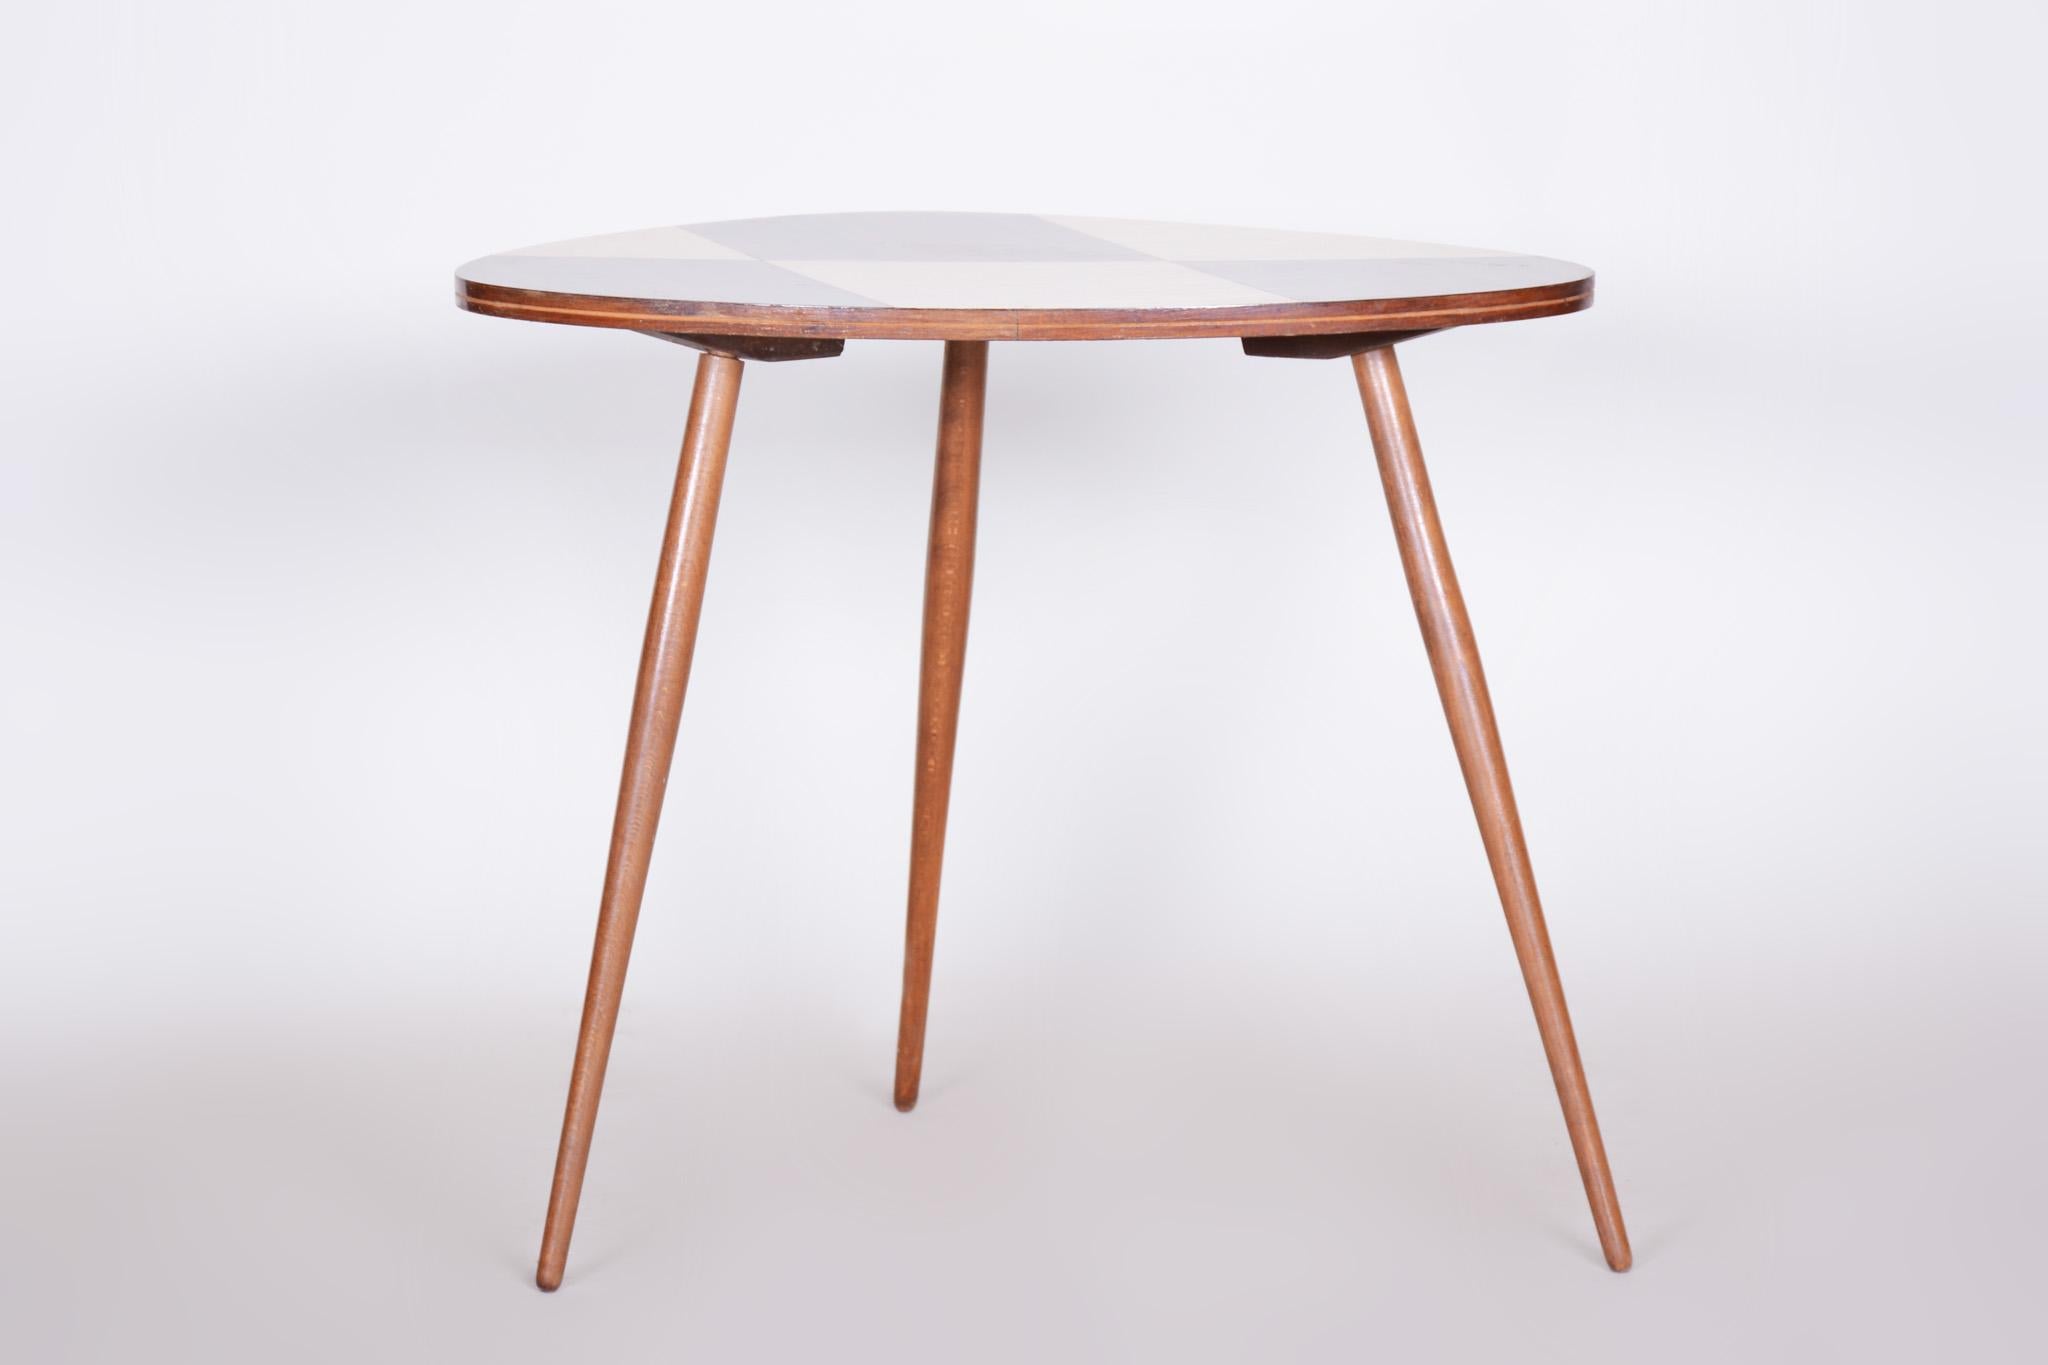 Small table.
Czech midcentury
Material: Formica and beech
Period: 1950-1959.